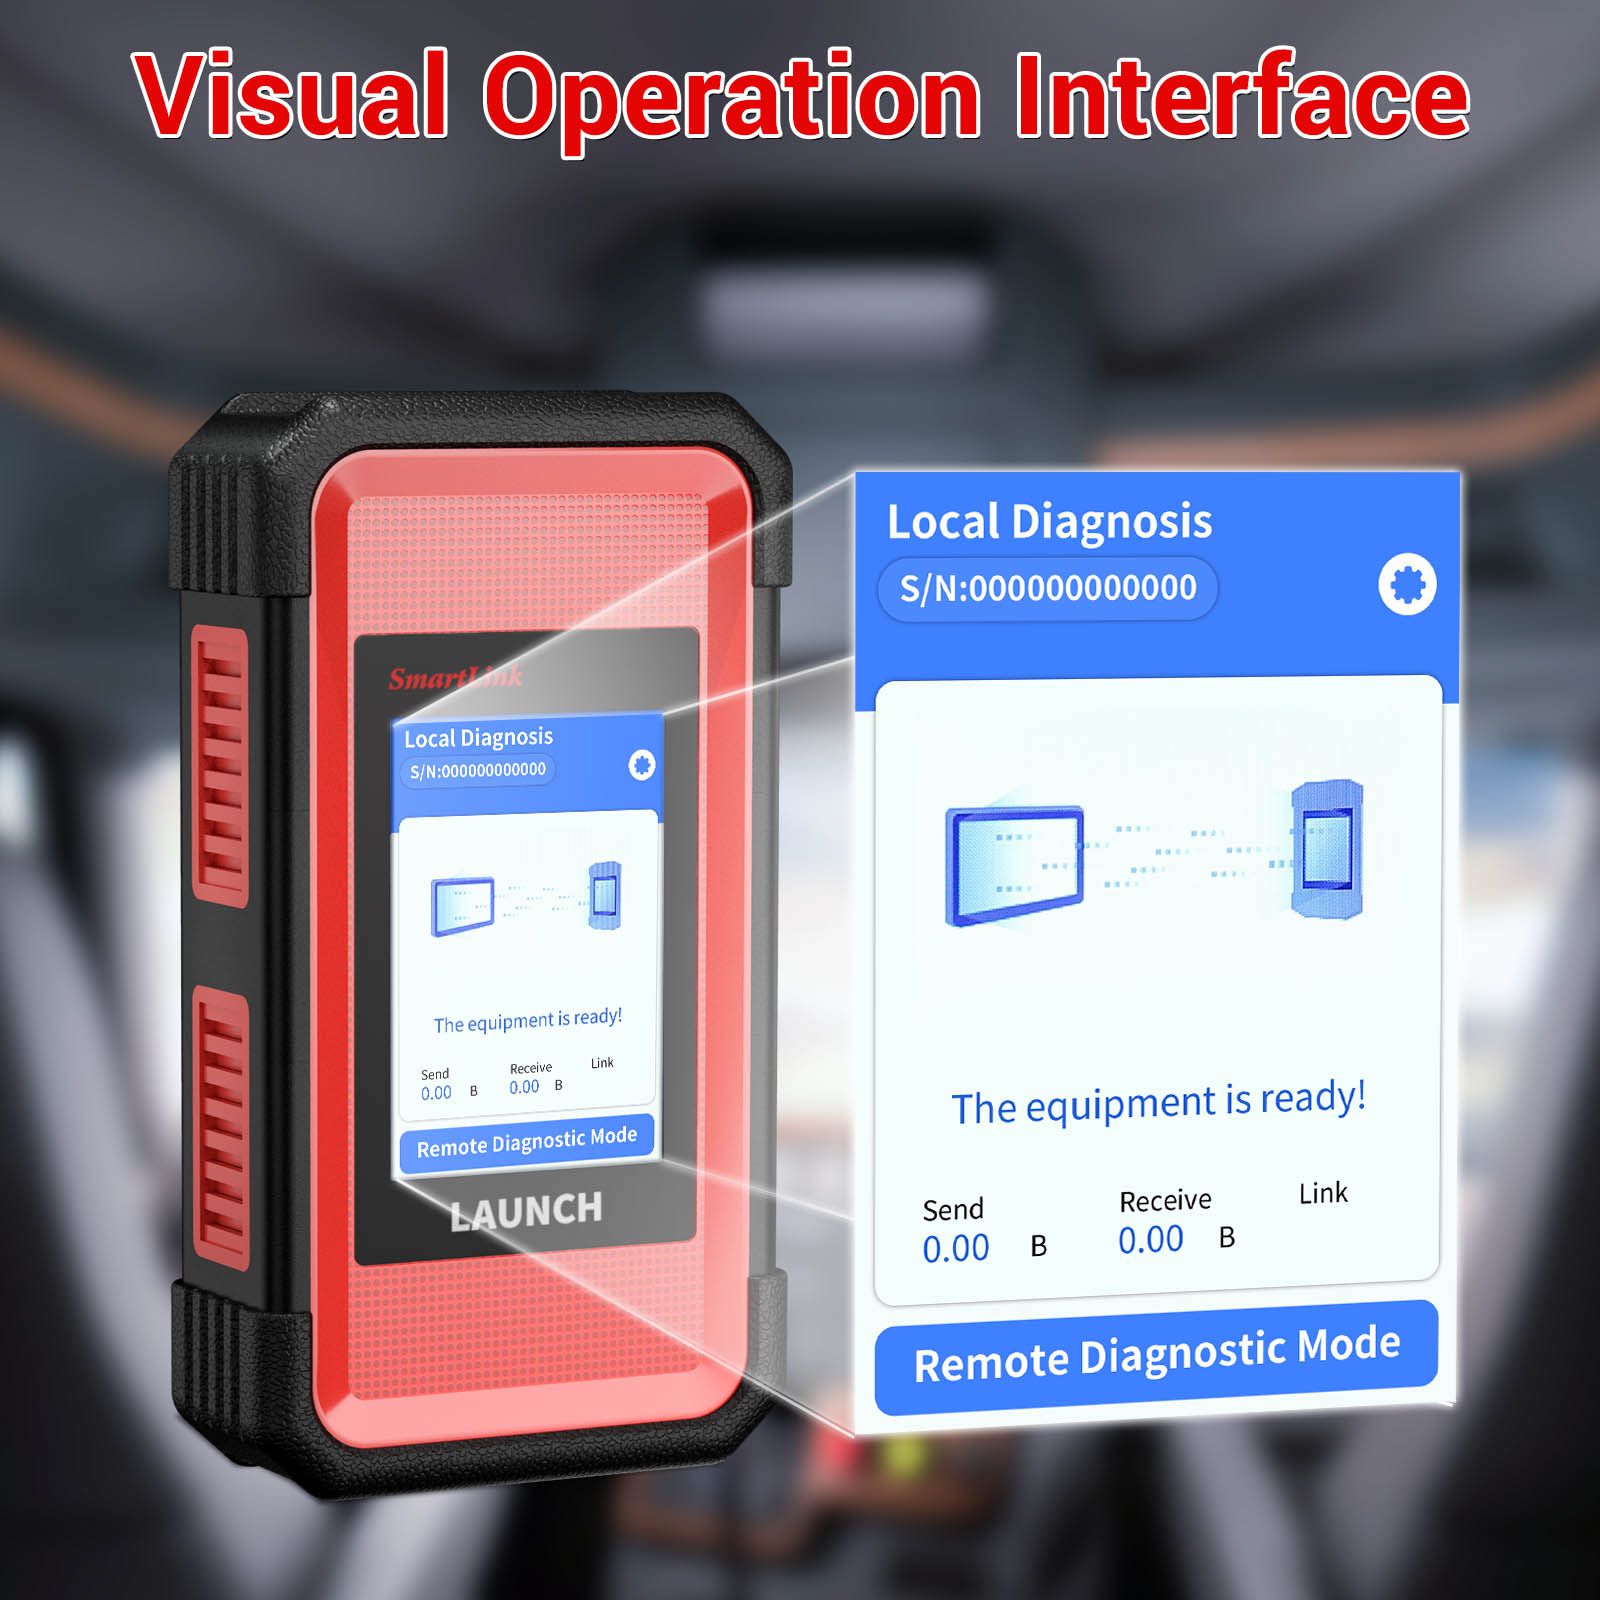 Launch X431 V+ 4.0 Wifi/Bluetooth 10.1inch Tablet with HD3 Ultimate Adapter Work on 12V & 24V Cars and Trucks